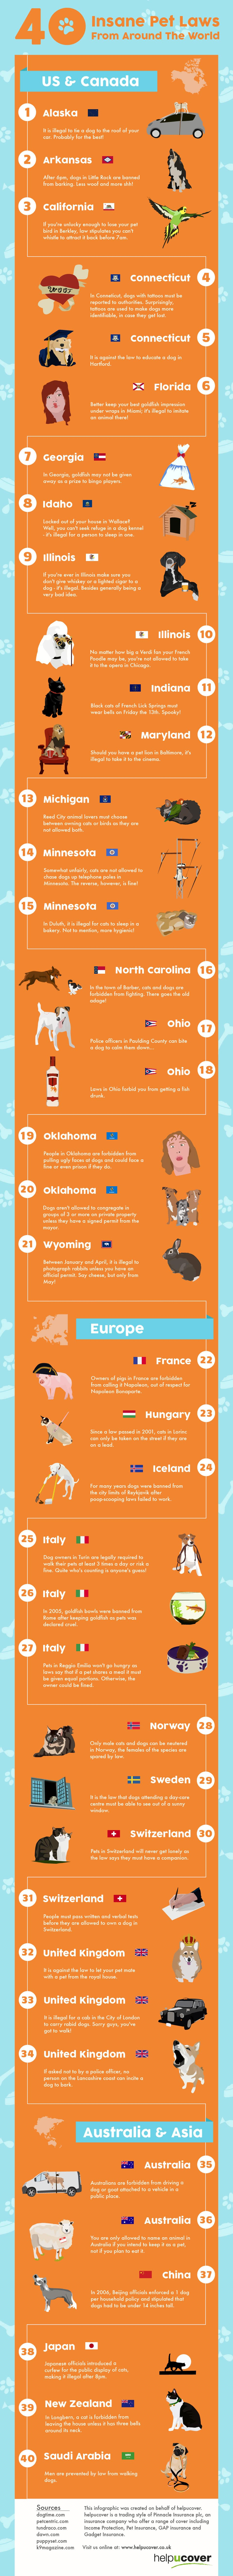 The 40 Strangest Pet Laws Around The World [Infographic]